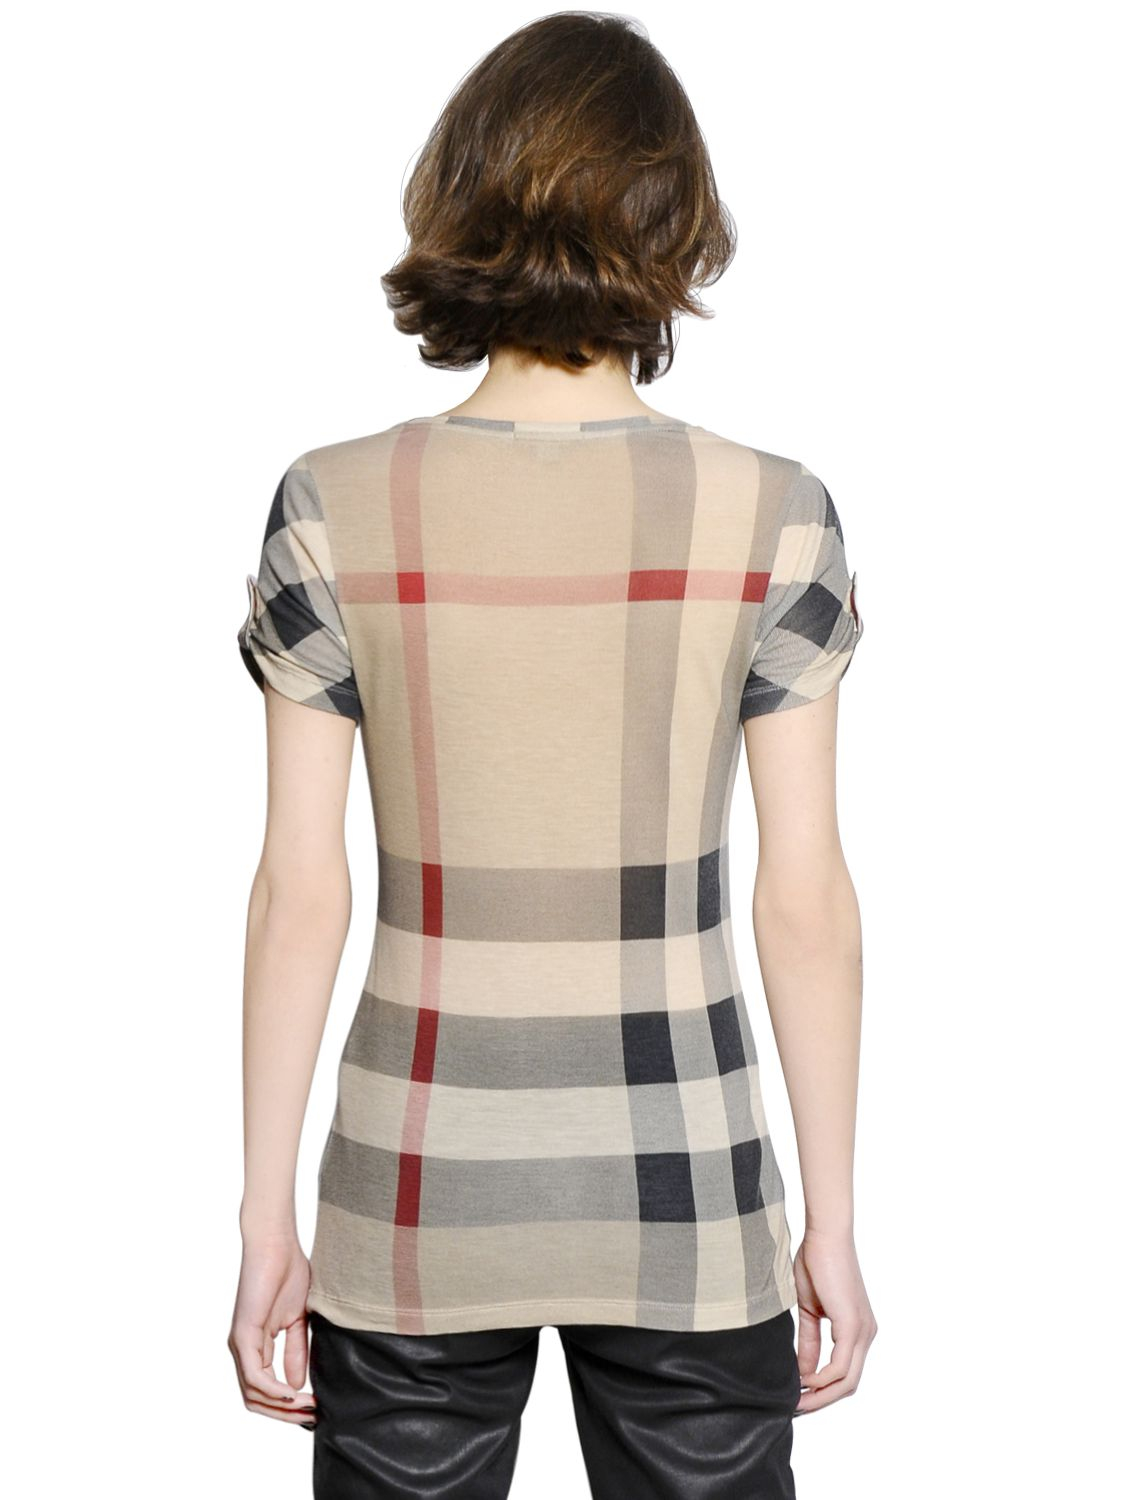 Burberry Brit Check Printed Modal T-Shirt in Beige (Natural) - Lyst